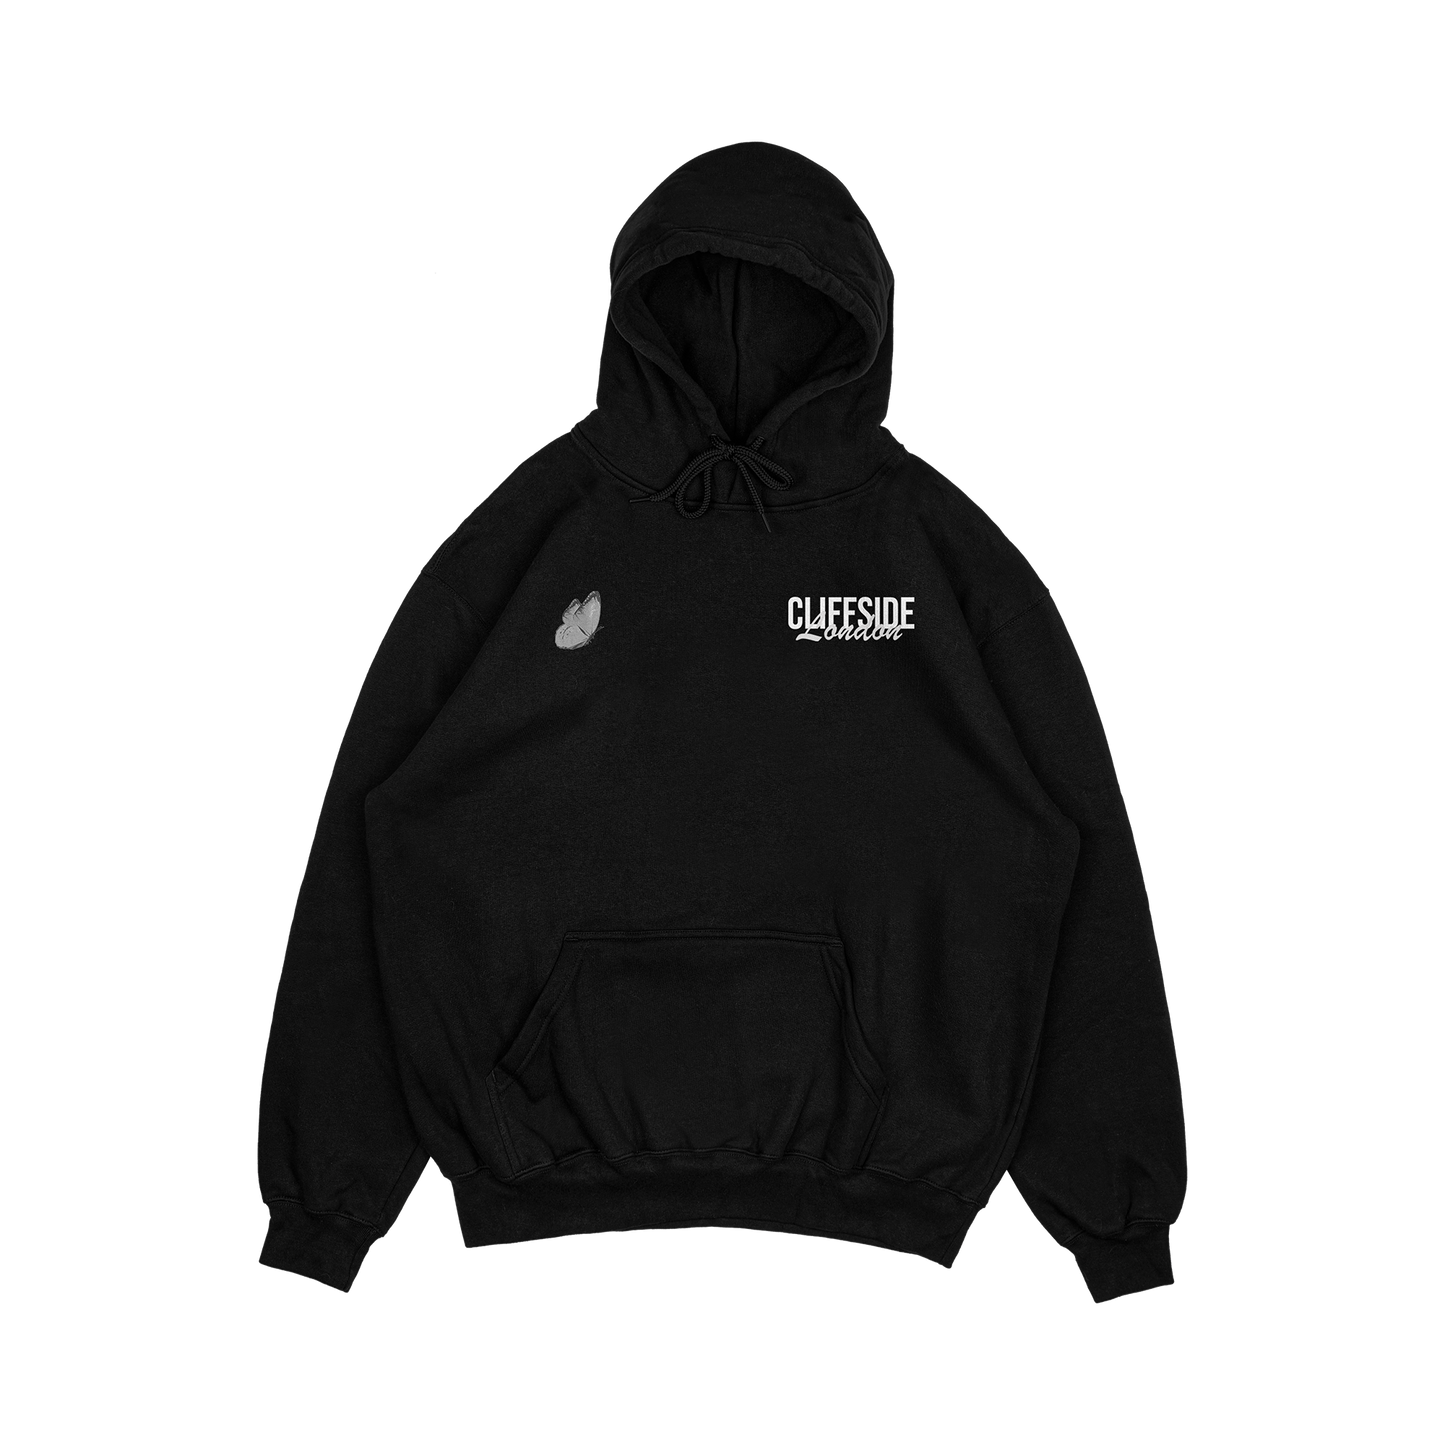 The Grayscale CliffSide “🦋 Butterfly” Premium Black Hoodie